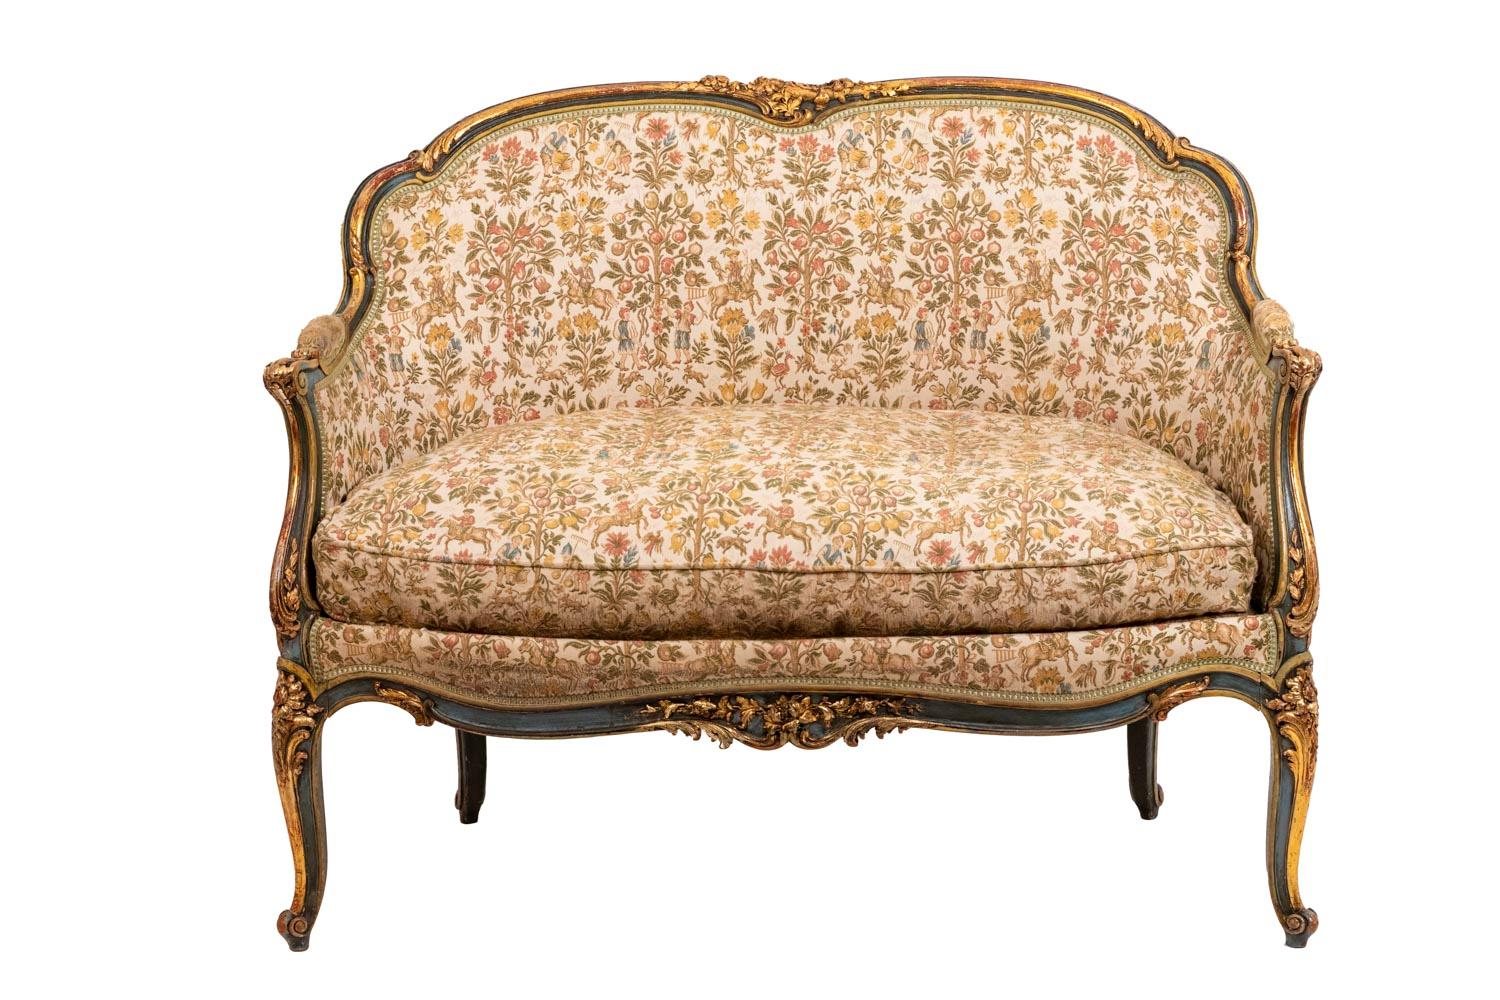 Louis XV style sofa in green lacquer and giltwood standing on four cabriole legs adorned with flowers. Scalloped apron decorated with flowers in its center. Full molded arms with manchettes on the leg line. Scalloped shape back mount adorned with